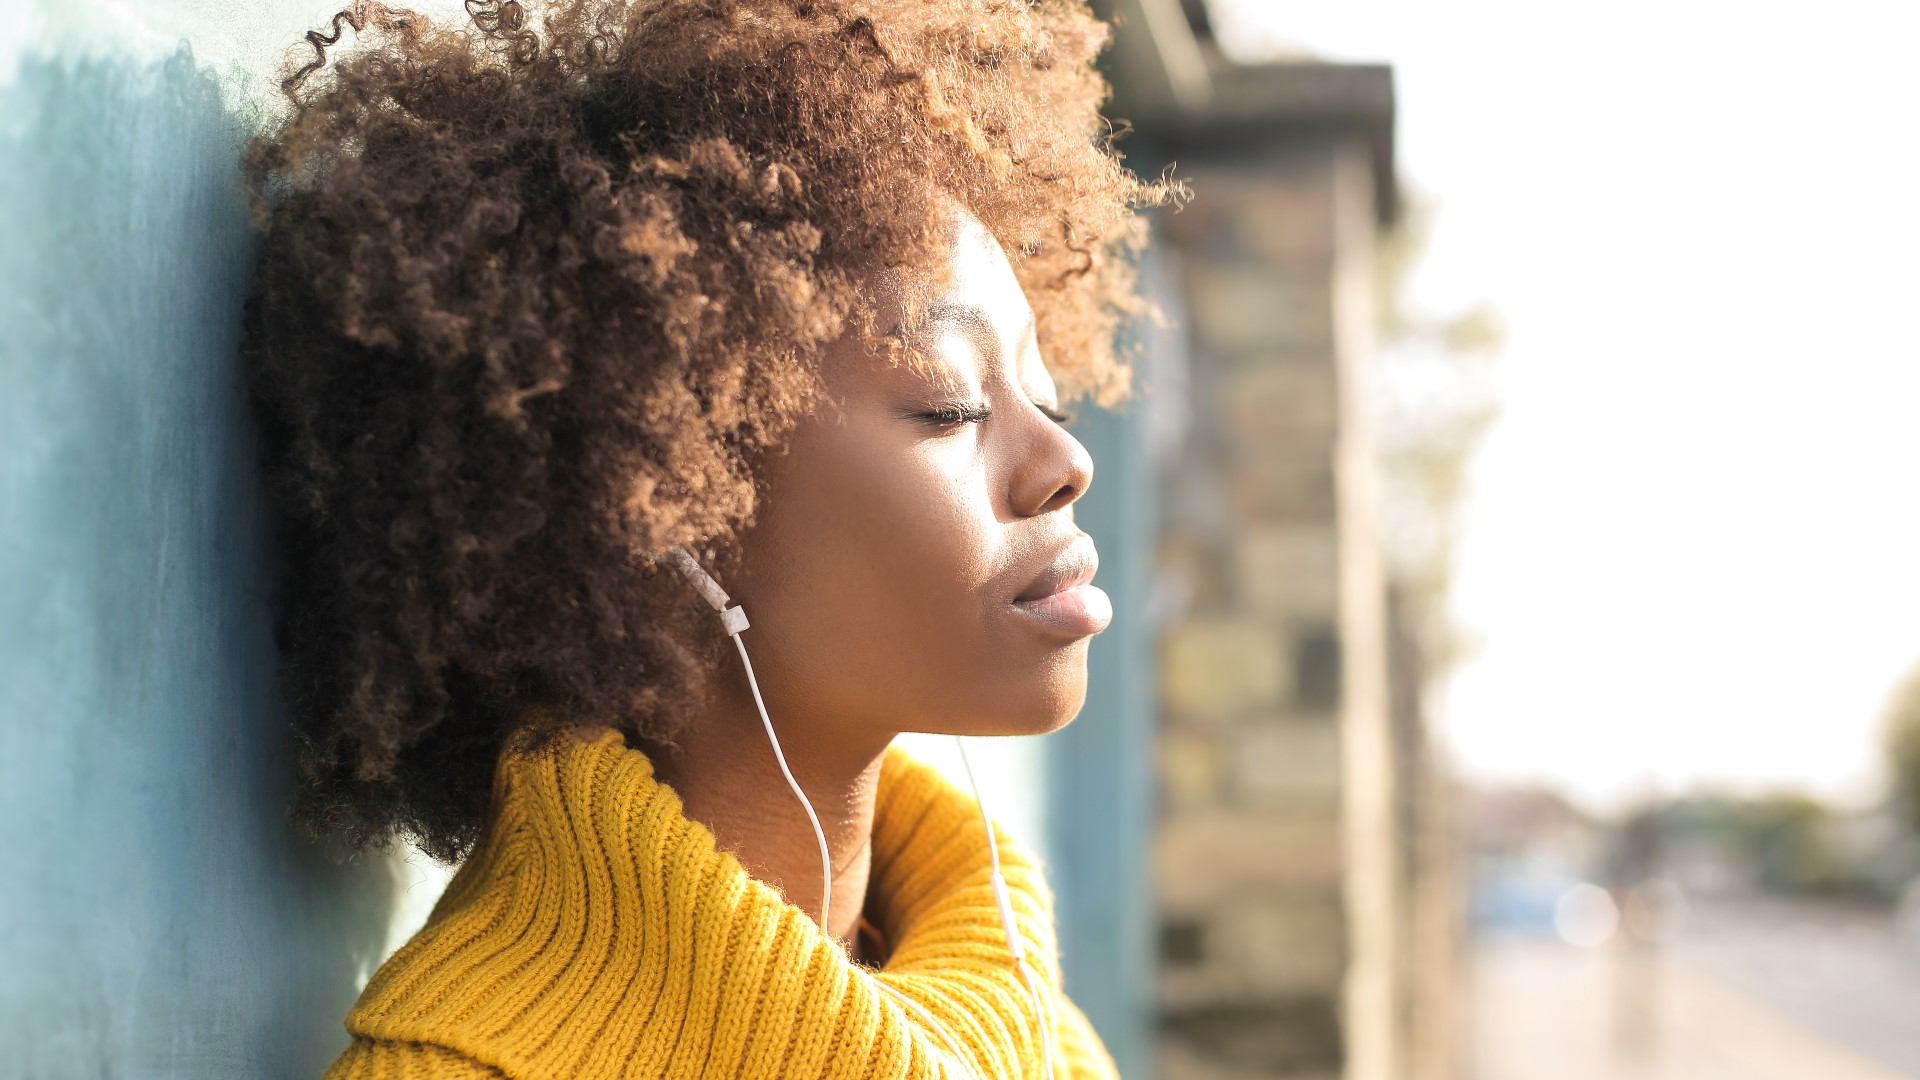 Music can be a powerful tool to help boost mood and relieve stress